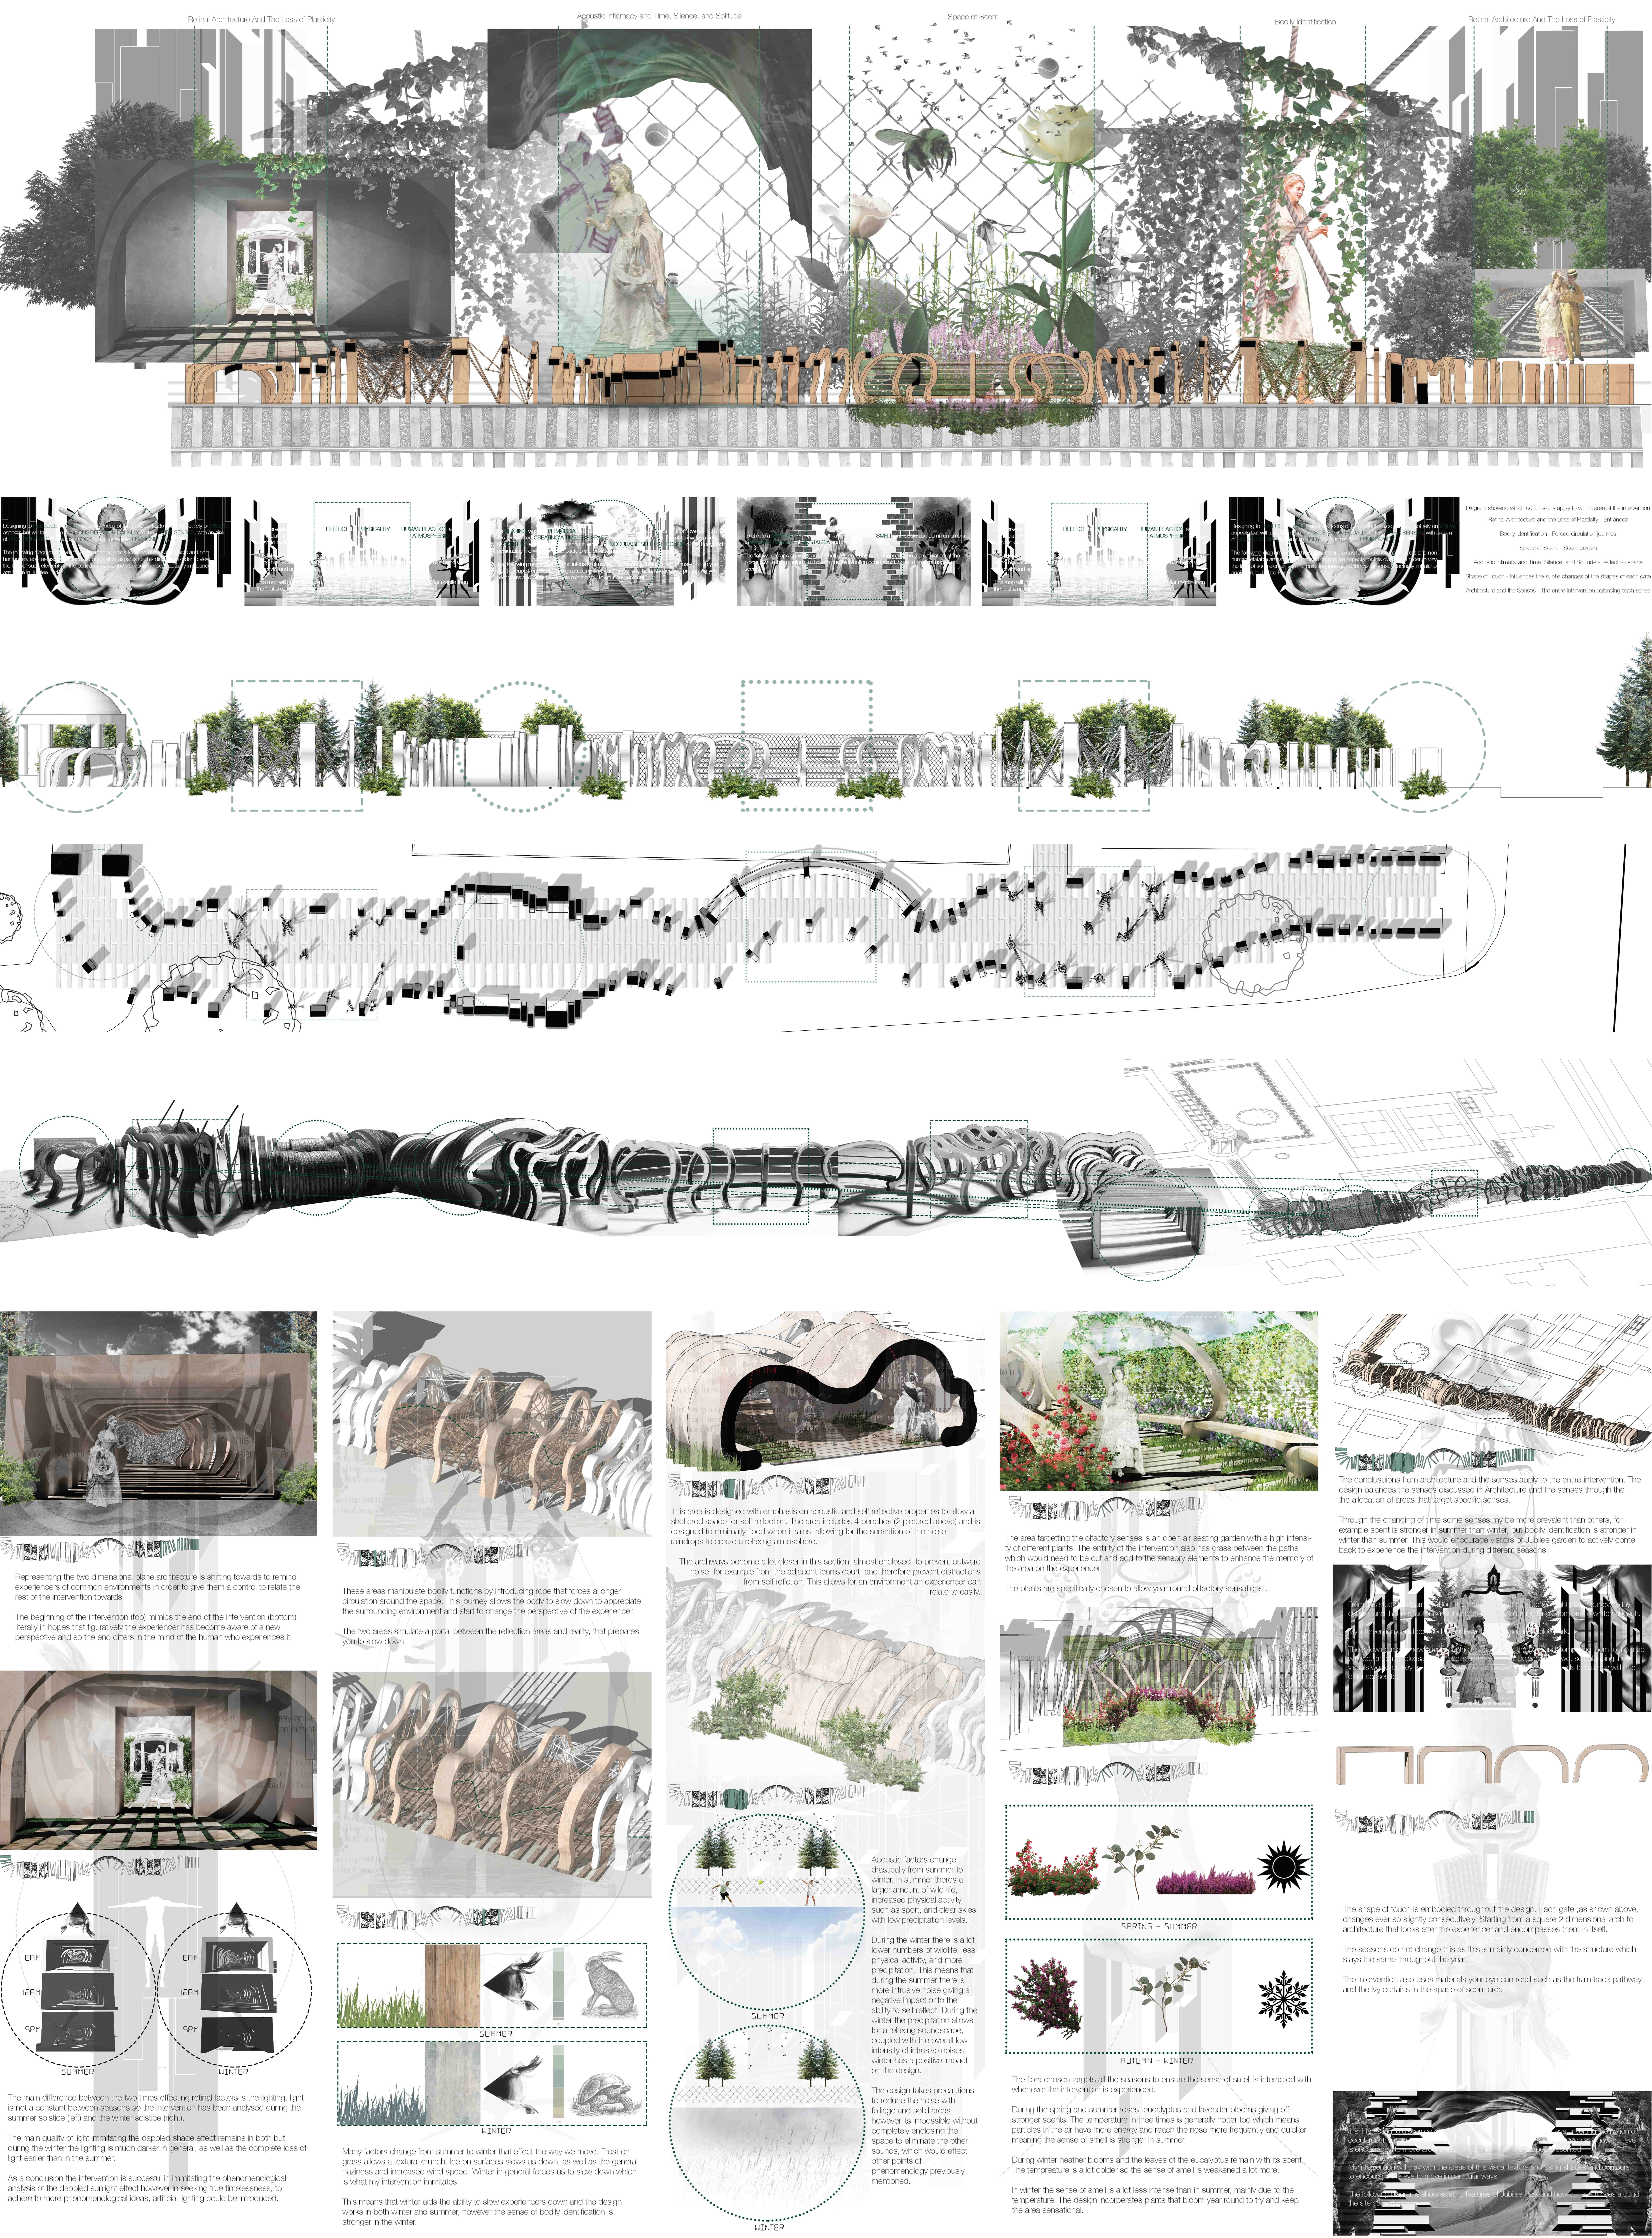 ' Reviving the Plasticity of Jubilee Park' centred on researching phenomenology to bring back the sculptural atmosphere of a park located, in Woodhall Spa, by creating a folly.